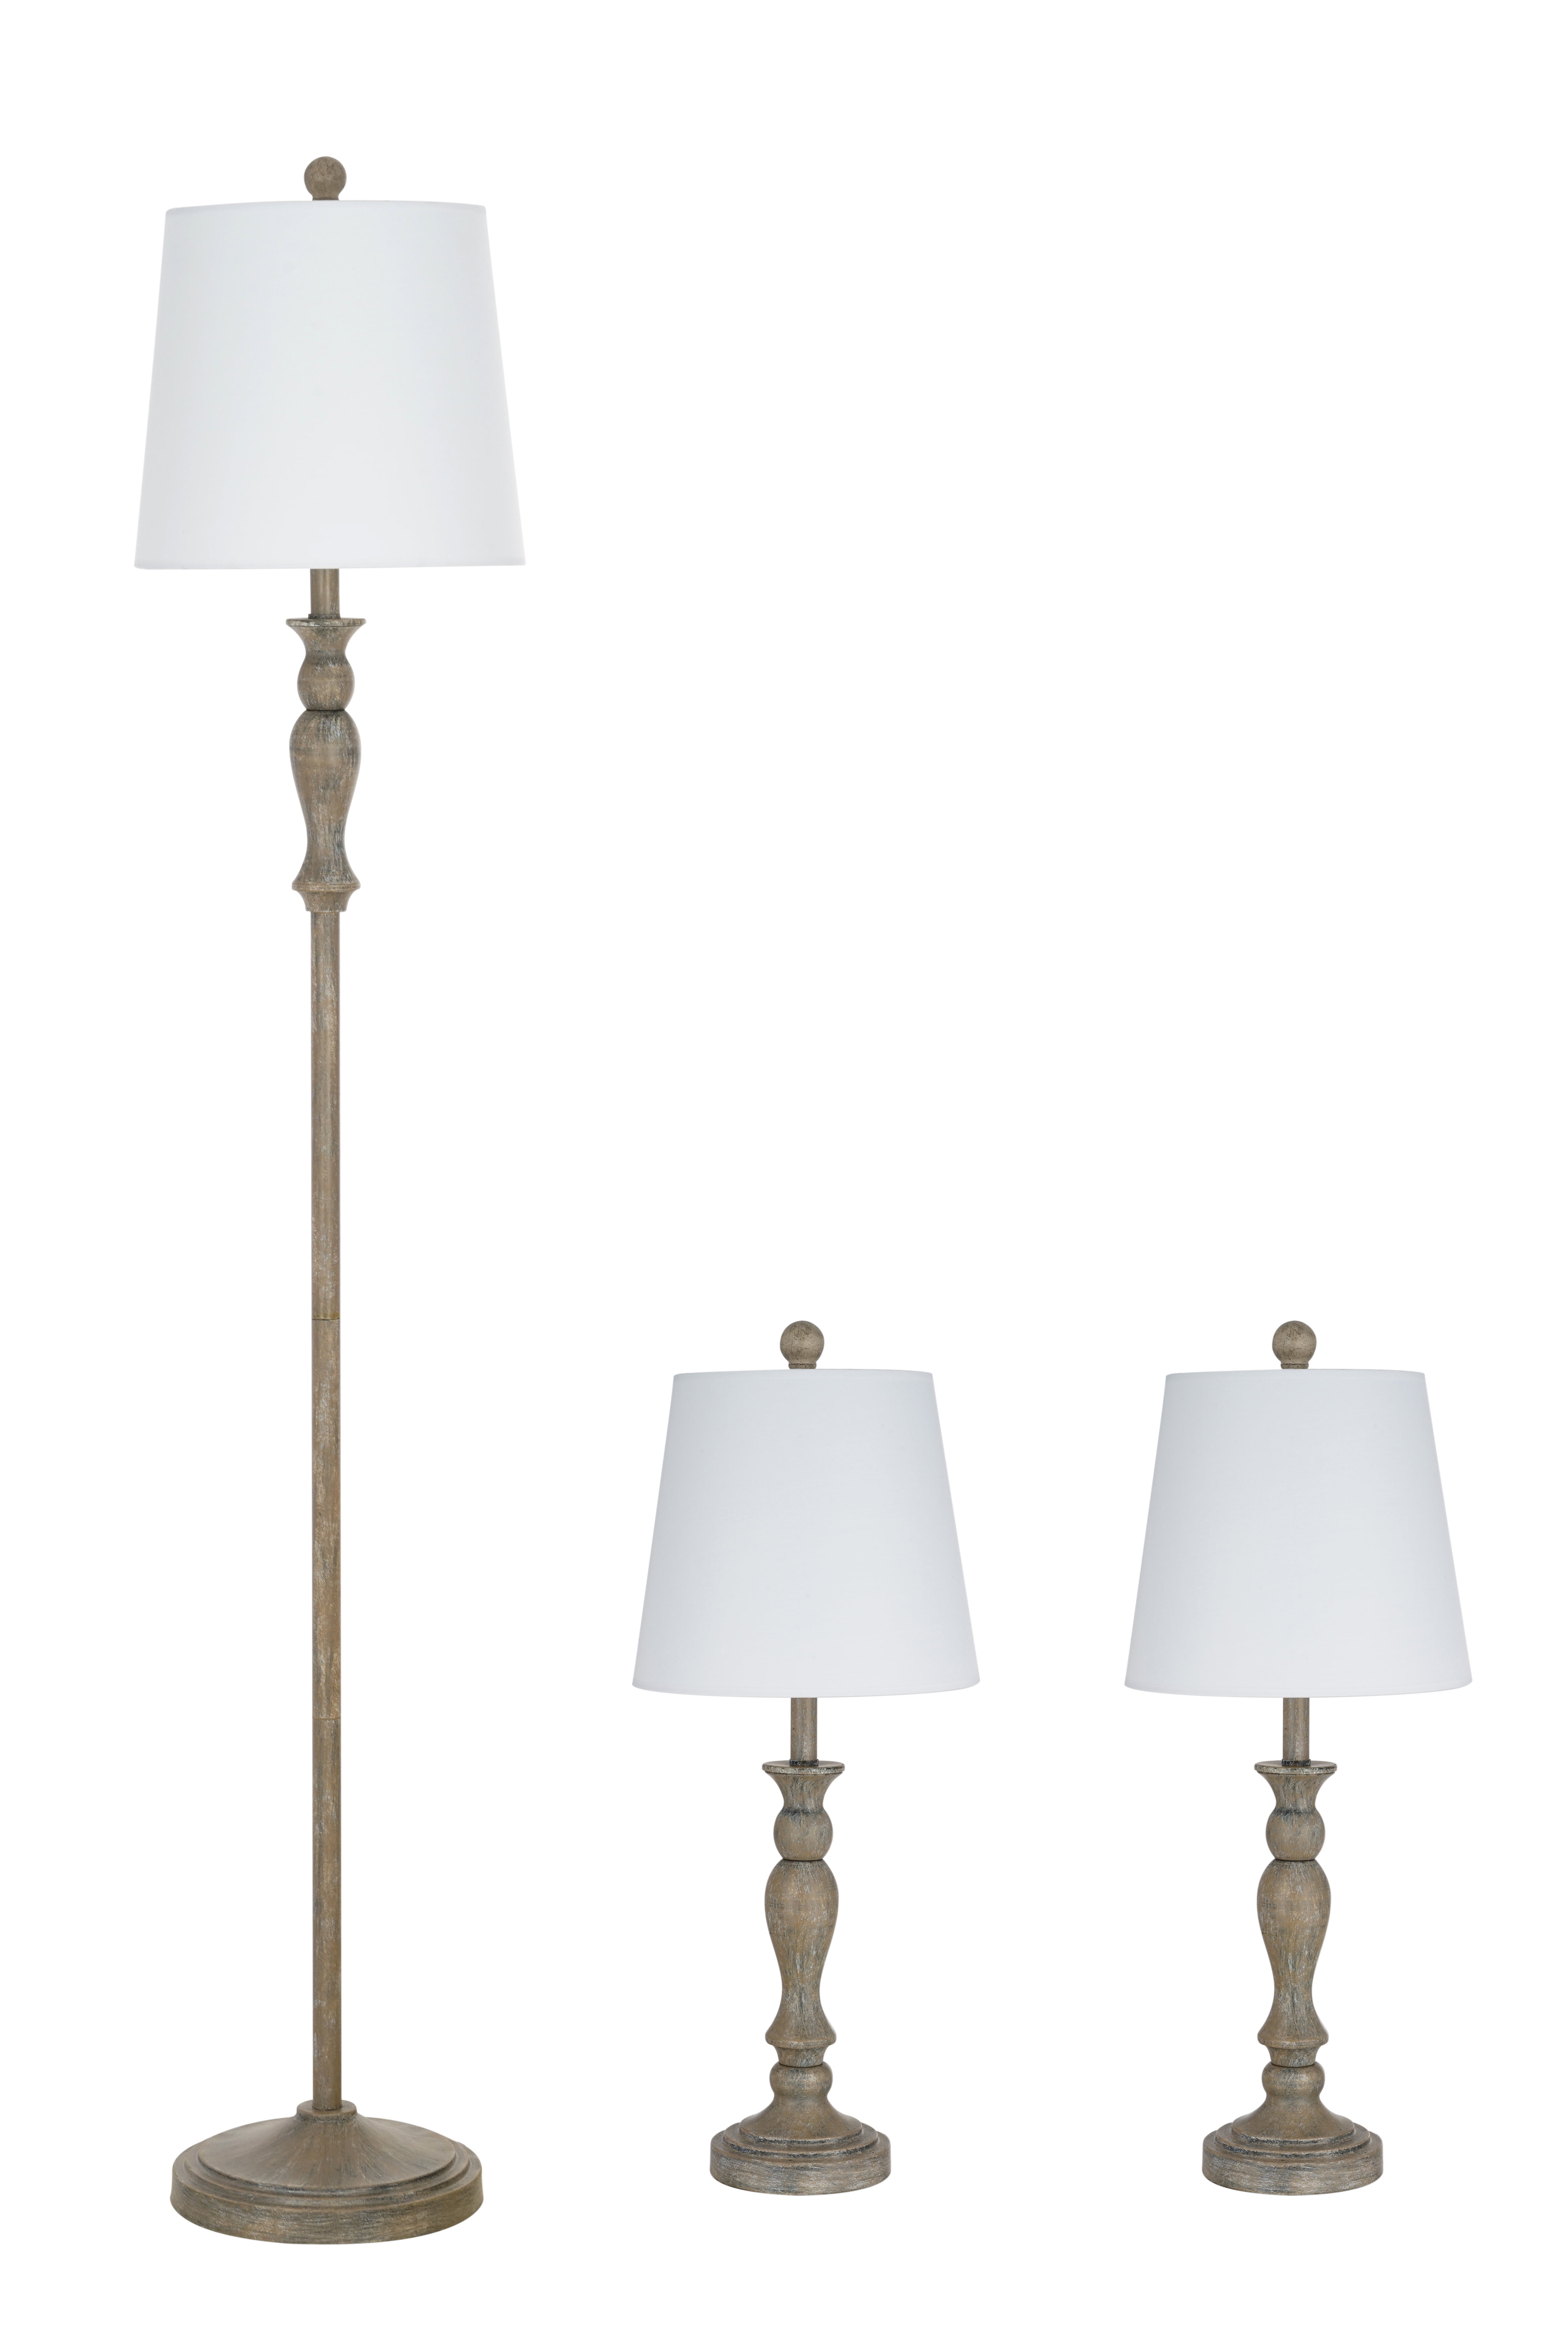 Gardens Modern Farmhouse 3 Pack Table, Rustic Table Lamp Sets